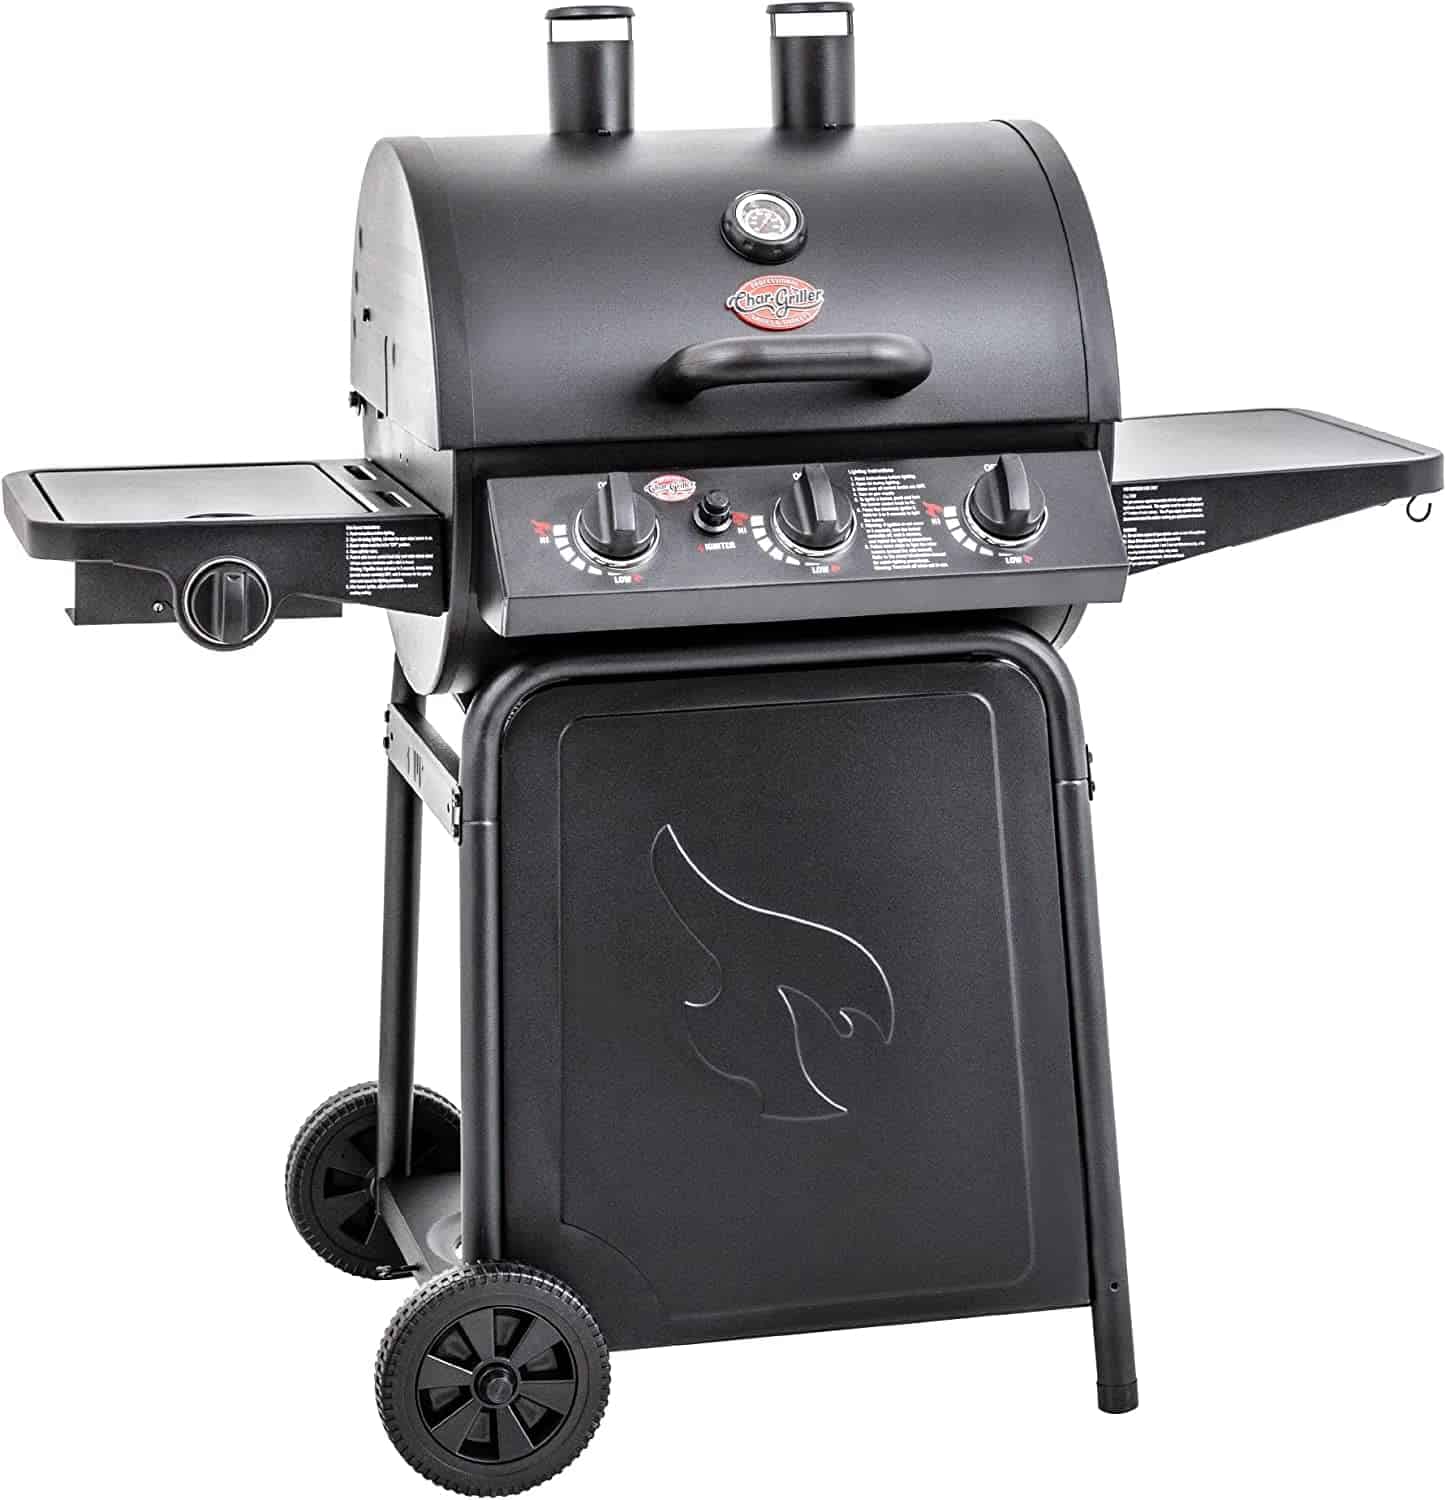 Best Value For Money Gas Grill: Char-Griller E3001 Grillin’ Pro